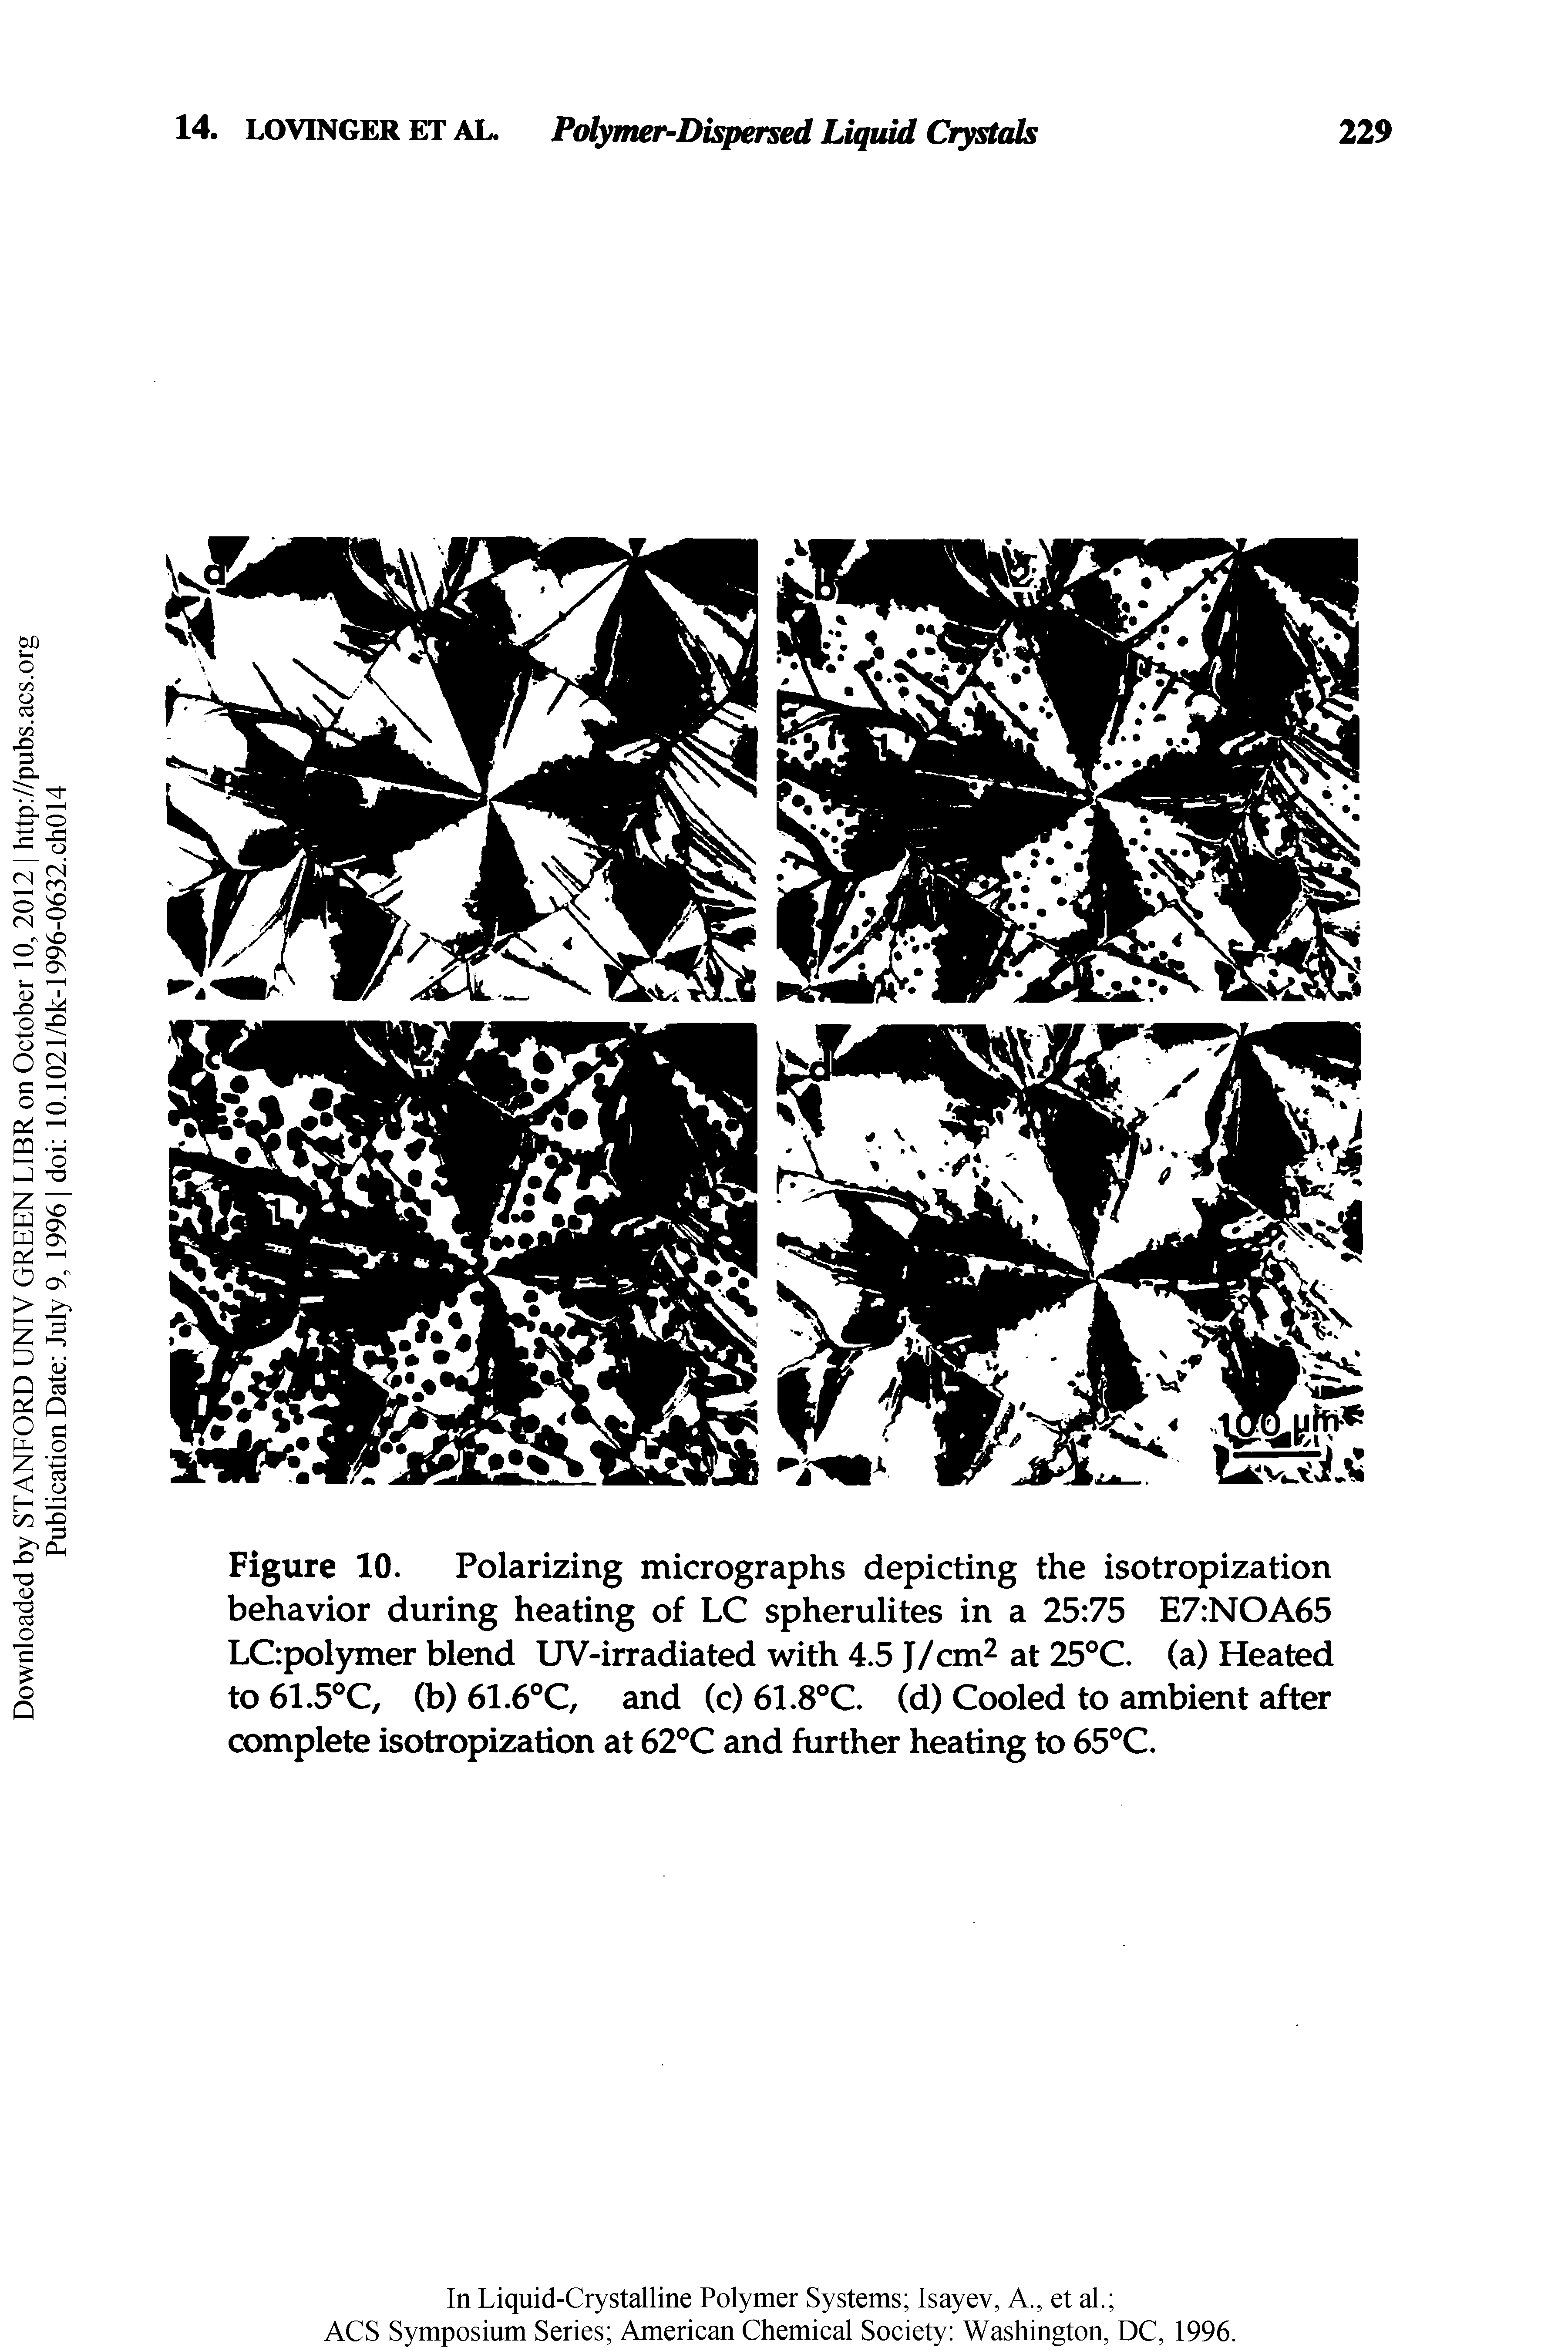 Figure 10. Polarizing micrographs depicting the isotropization behavior during heating of LC spherulites in a 25 75 E7 NOA65 LCrpolymer blend UV-irradiated with 4.5 J/cm at 25°C. (a) Heated to 61.5 C, (b) 61.6 C, and (c) 61.8°C. (d) Cooled to ambient after complete isotropization at 62 C and further heating to 65 C.